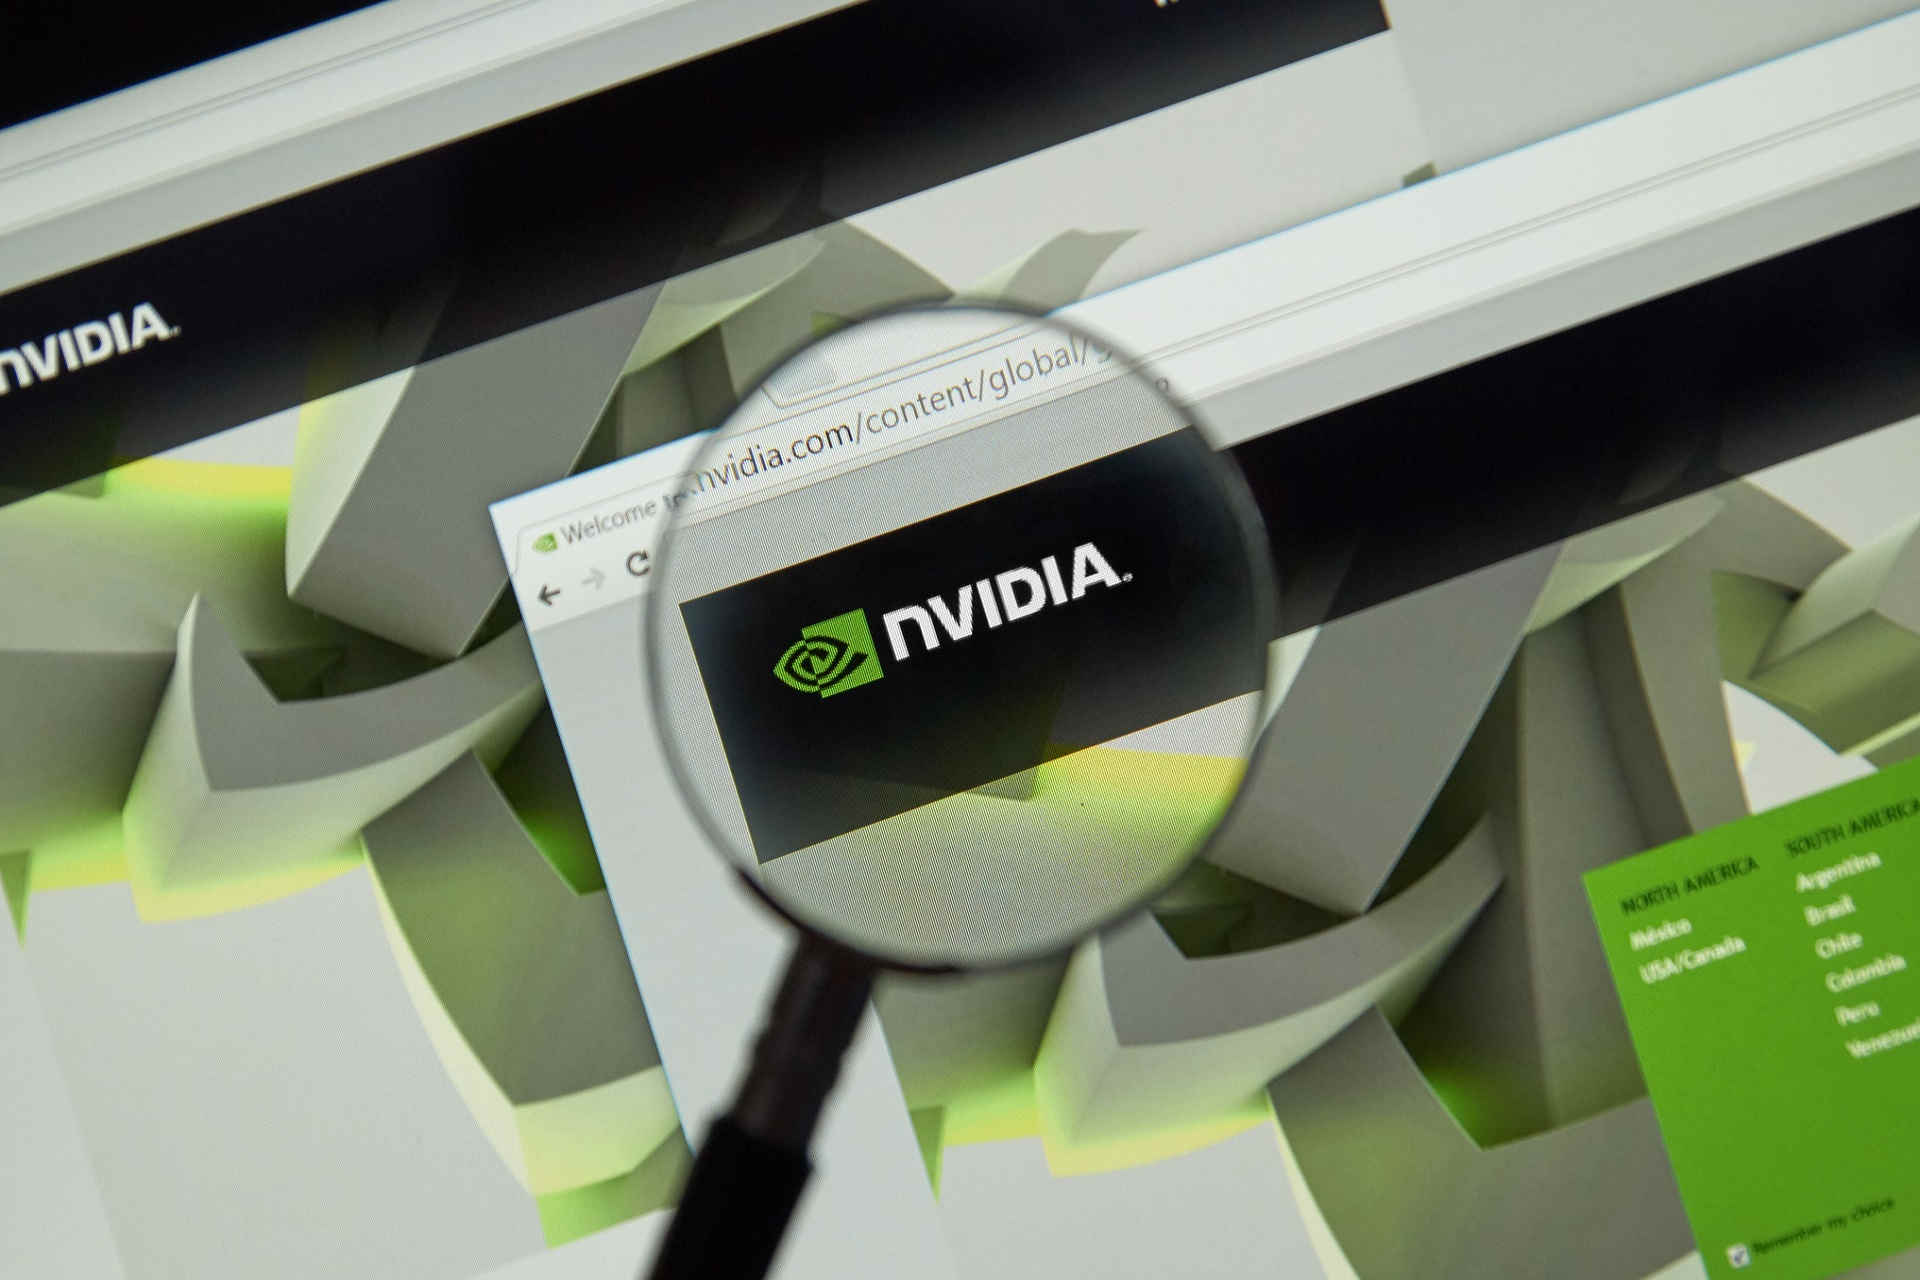 What to do if NVIDIA driver not compatible with this Windows version